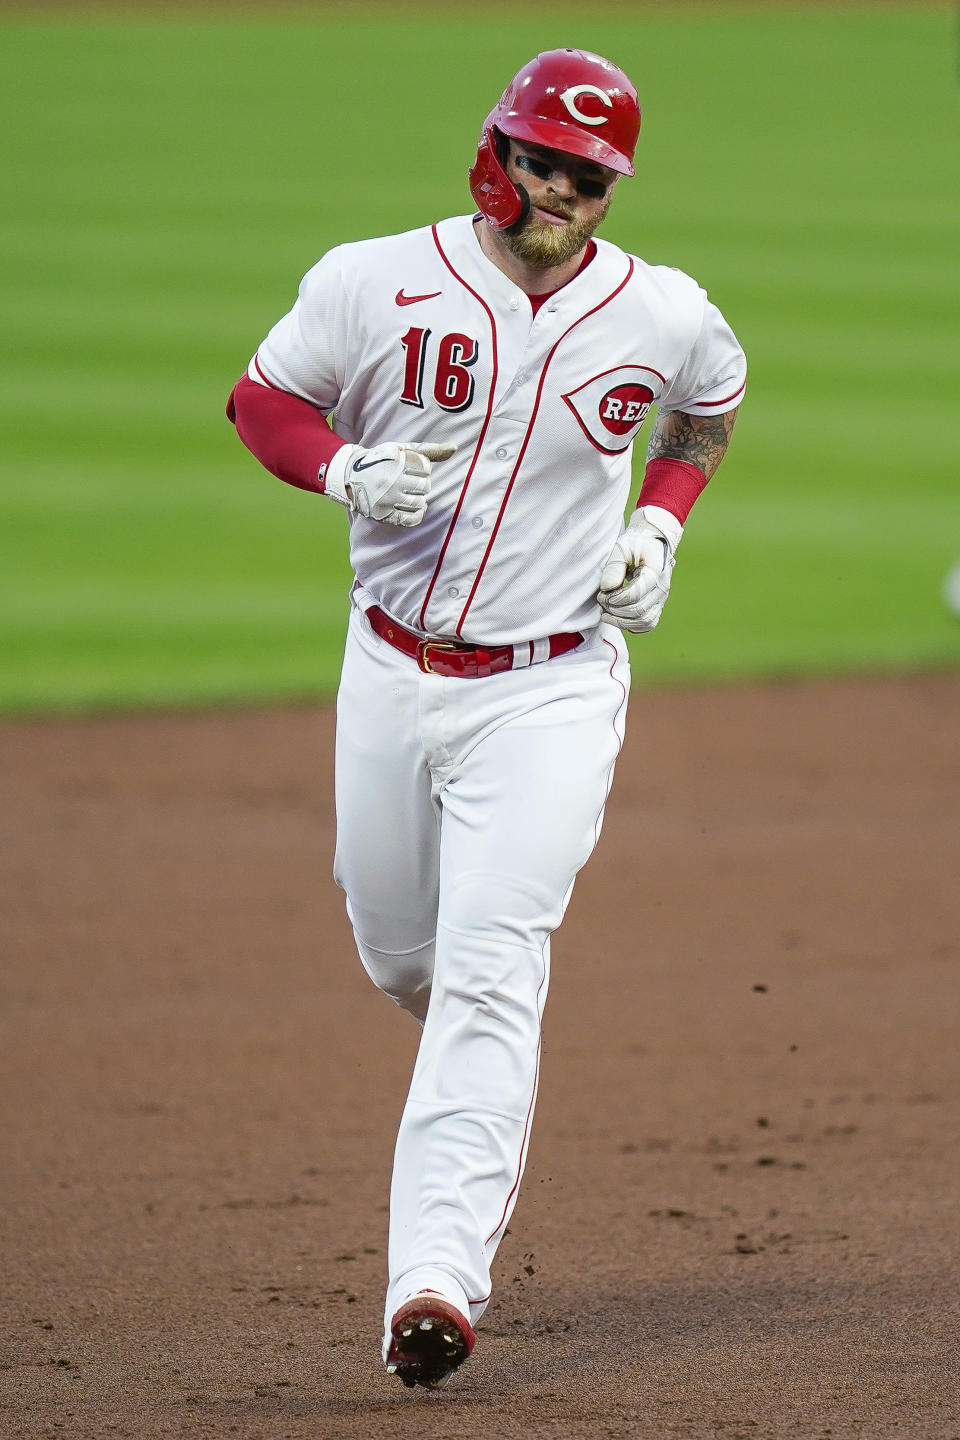 Cincinnati Reds' Tucker Barnhart runs the bases after hitting a home run during the second inning of the team's baseball game against the Pittsburgh Pirates in Cincinnati, Tuesday, Sept. 15, 2020. (AP Photo/Bryan Woolston)